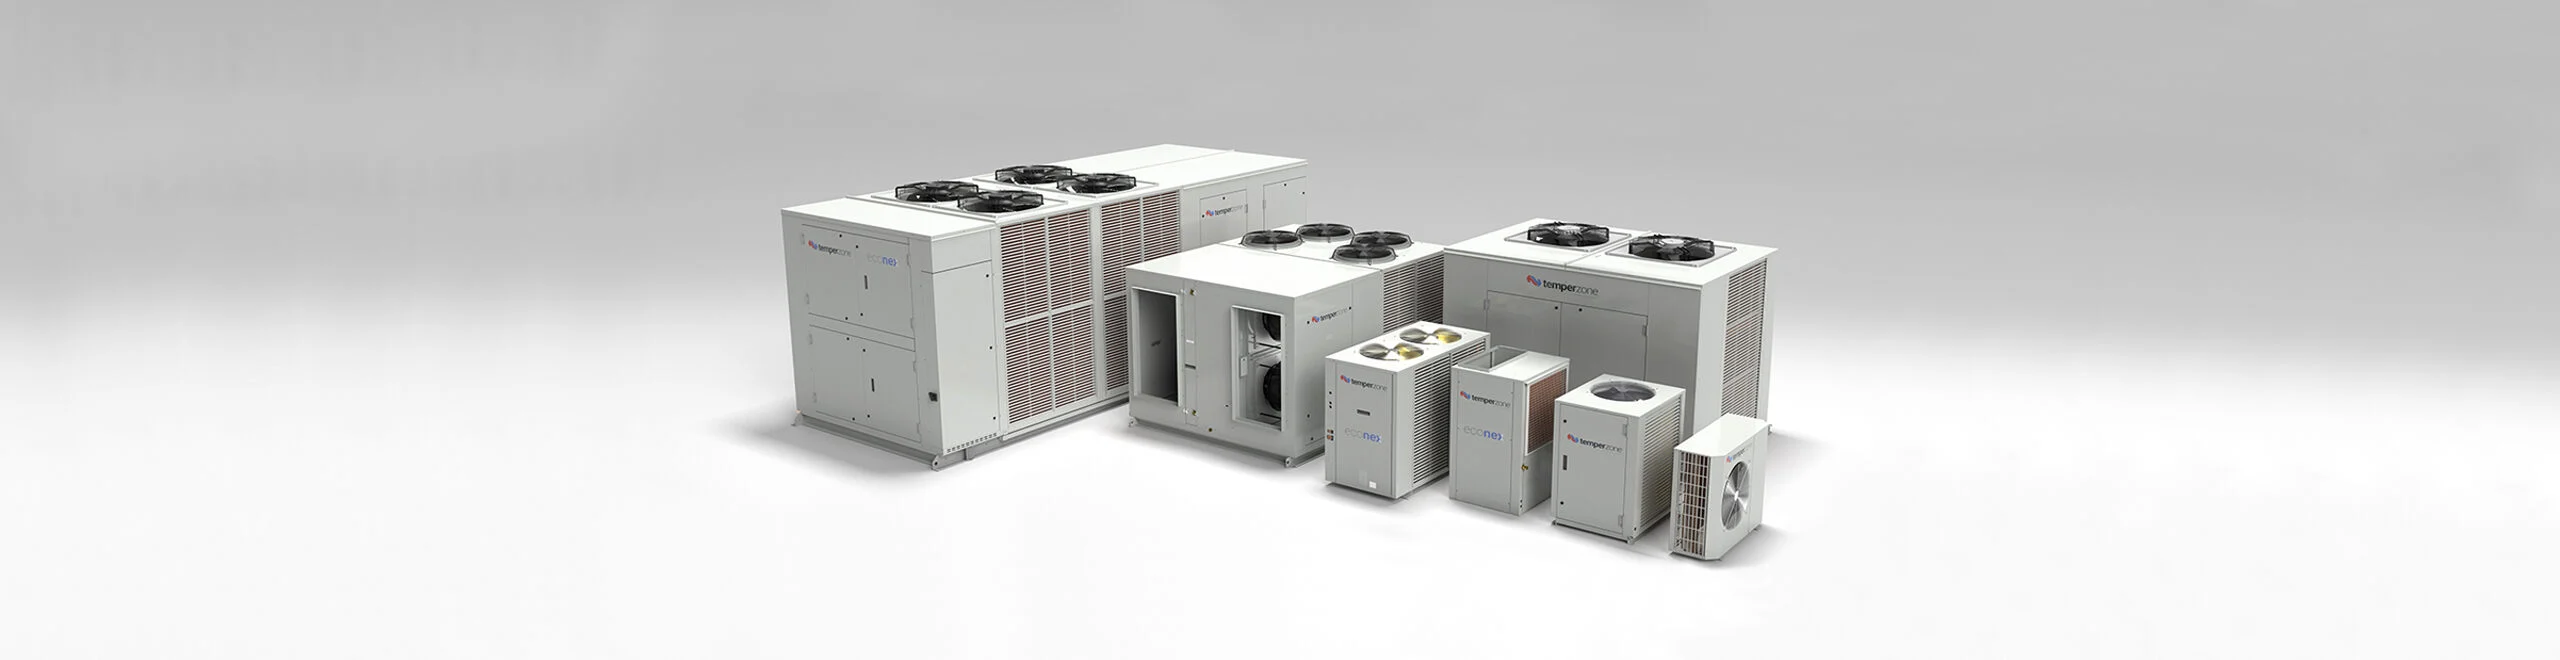 Air-conditioning-units